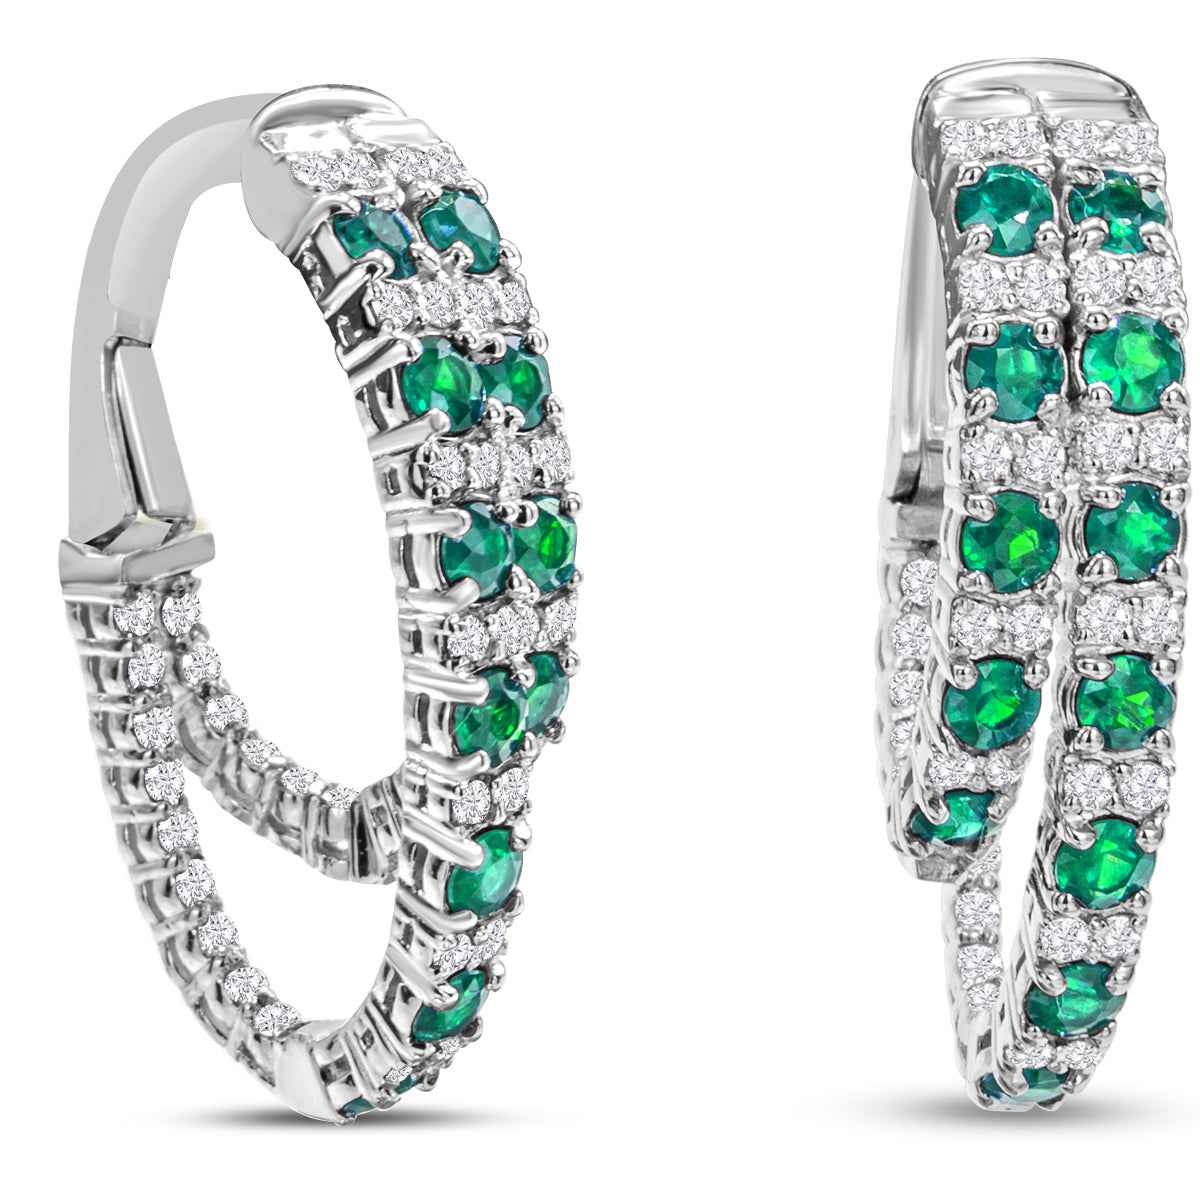 Sselects 2 1/2 Carat Emerald And Diamond Hoop Earrings In 14 Karat White I-j, I1-i2 In Gold